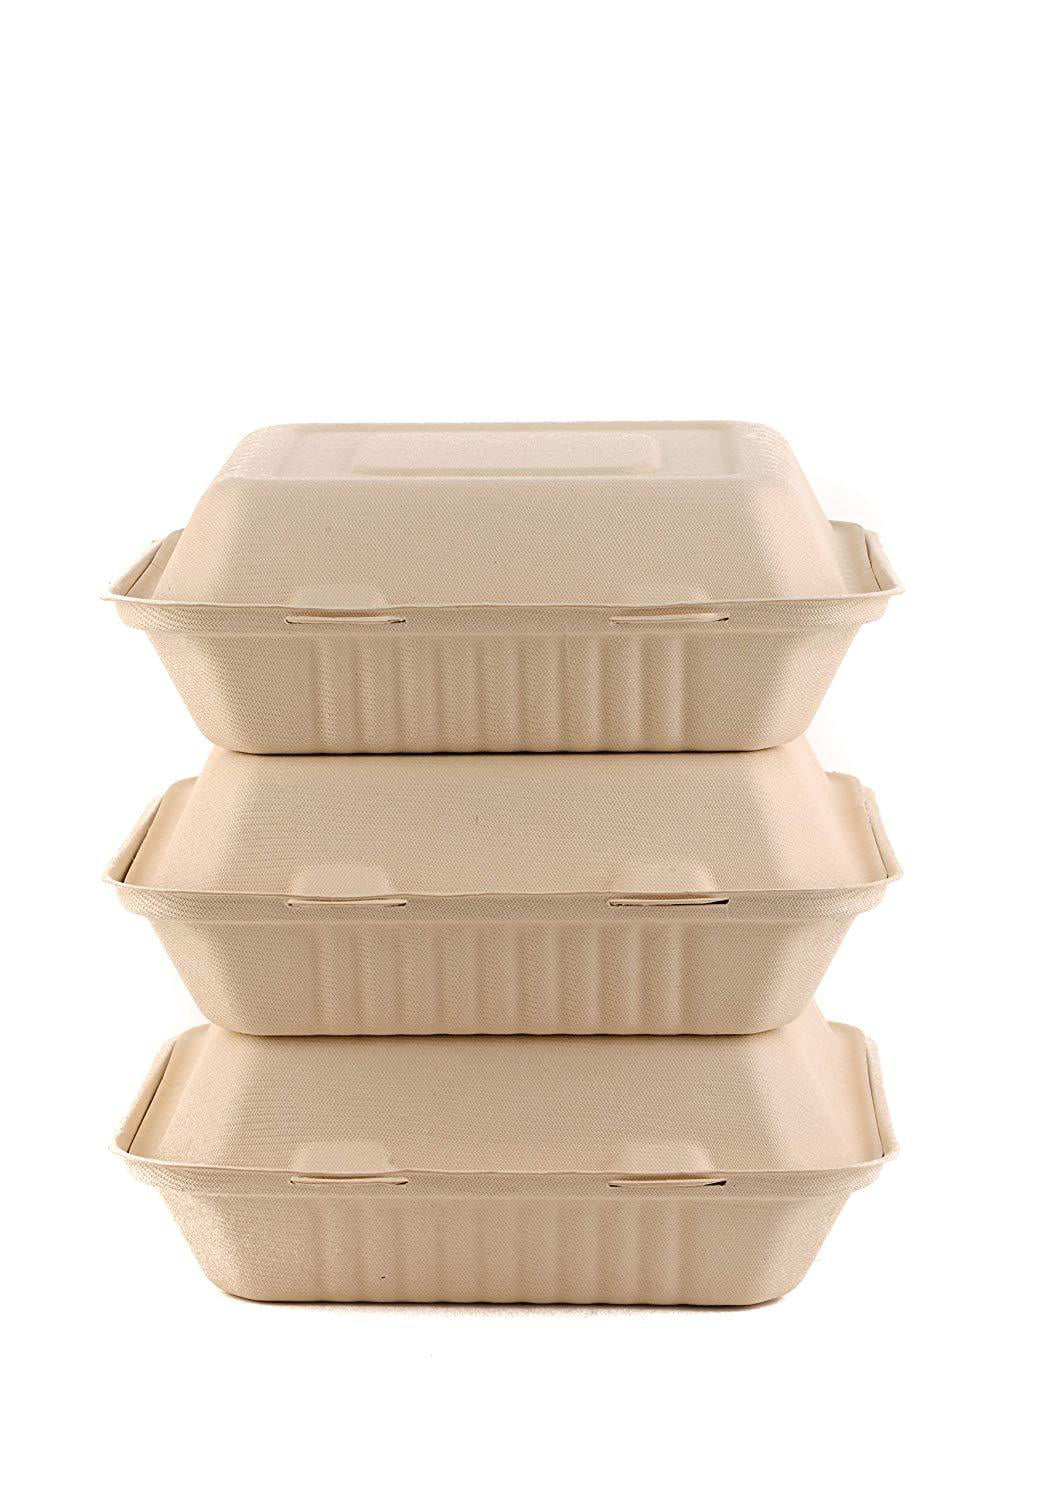 Eco Friendly 8″ x 8″ x 3″ Compostable 3-Compartment Takeout